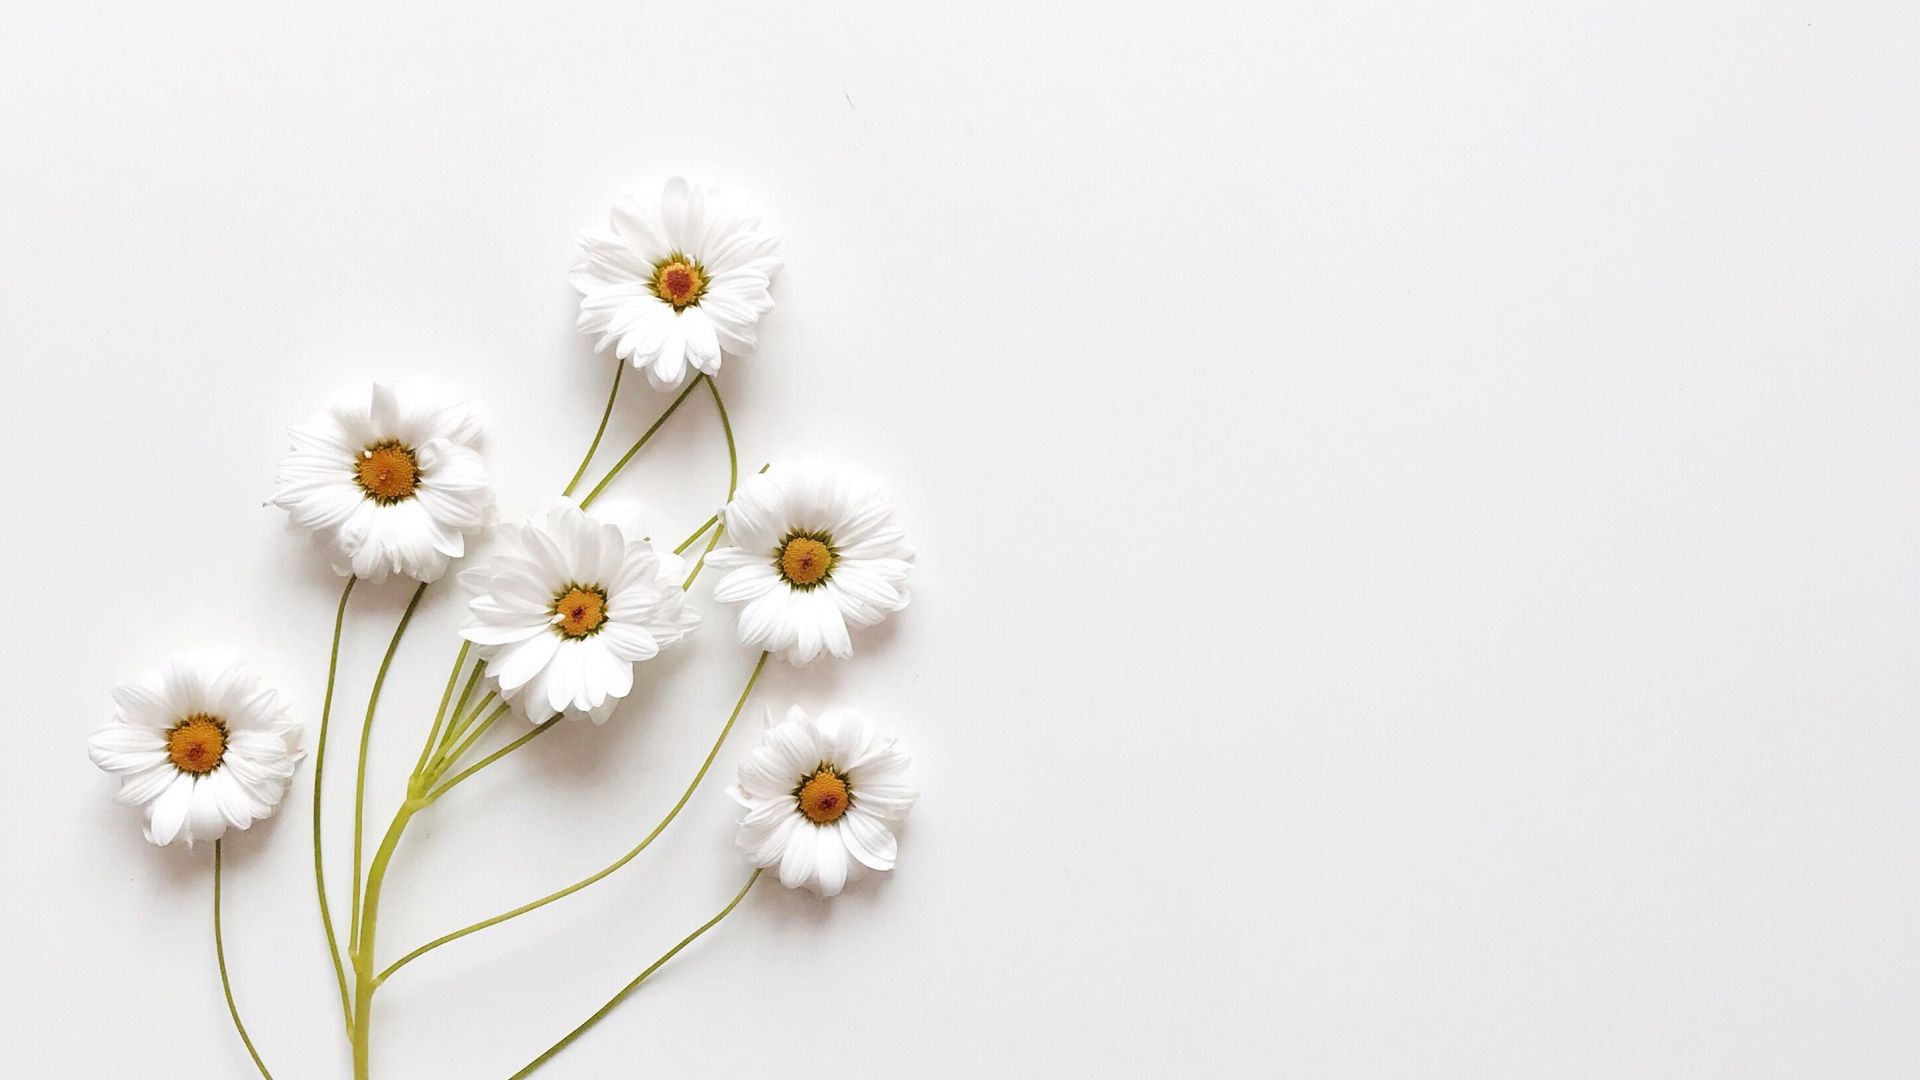 A white background with white flowers on the left side of the image. - Daisy, white